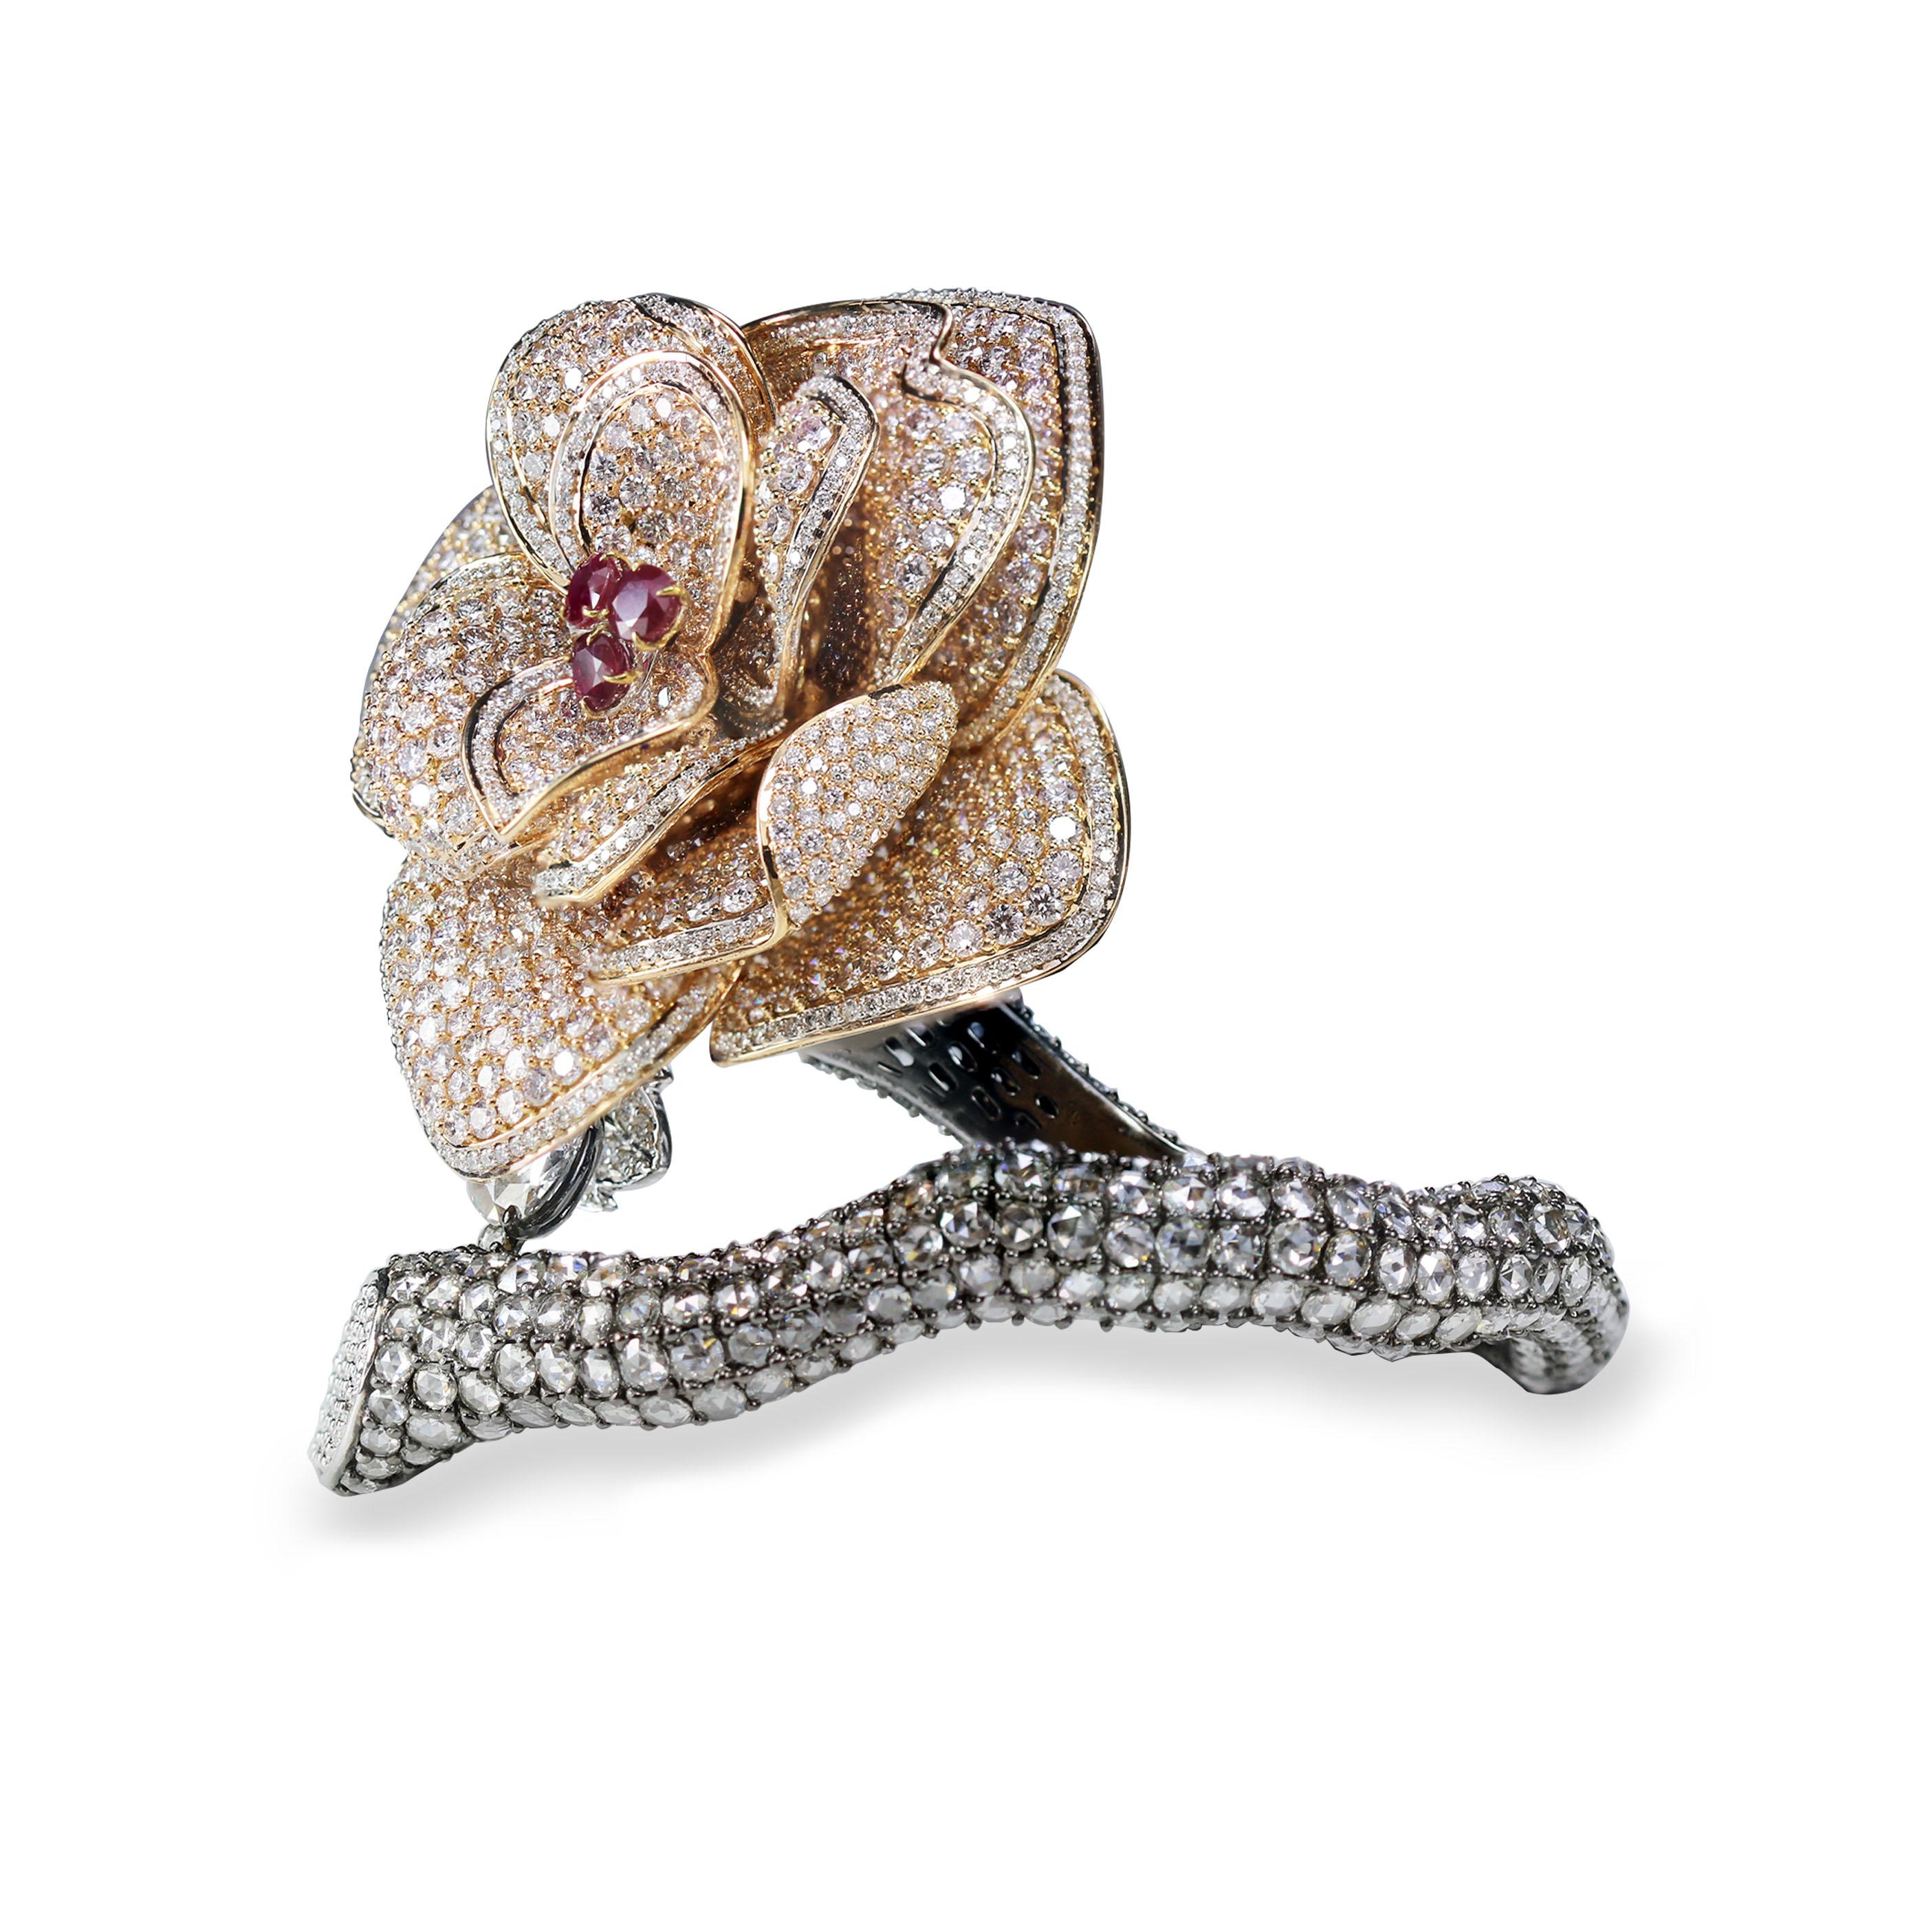 Brilliant cut and rosecut diamonds and ruby floral cuff

We reinvent the classic floral motif with this rose-inspired statement cuff that is a dialogue between handpicked brilliant cut and rosecut diamonds VS-SI quality in an interplay of pavé and